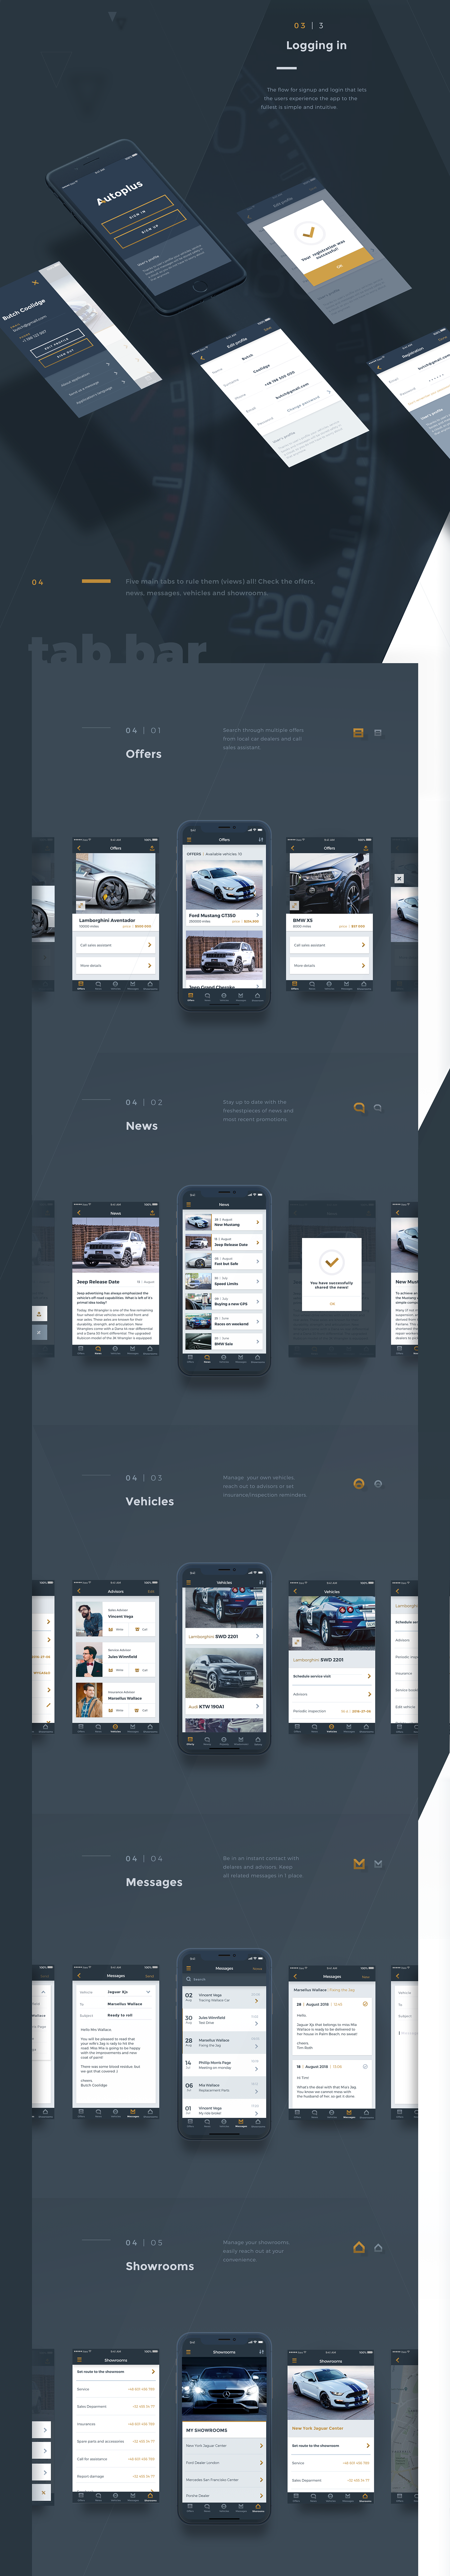 app car ios android dashboard ux UI wireframes animation  Mockup